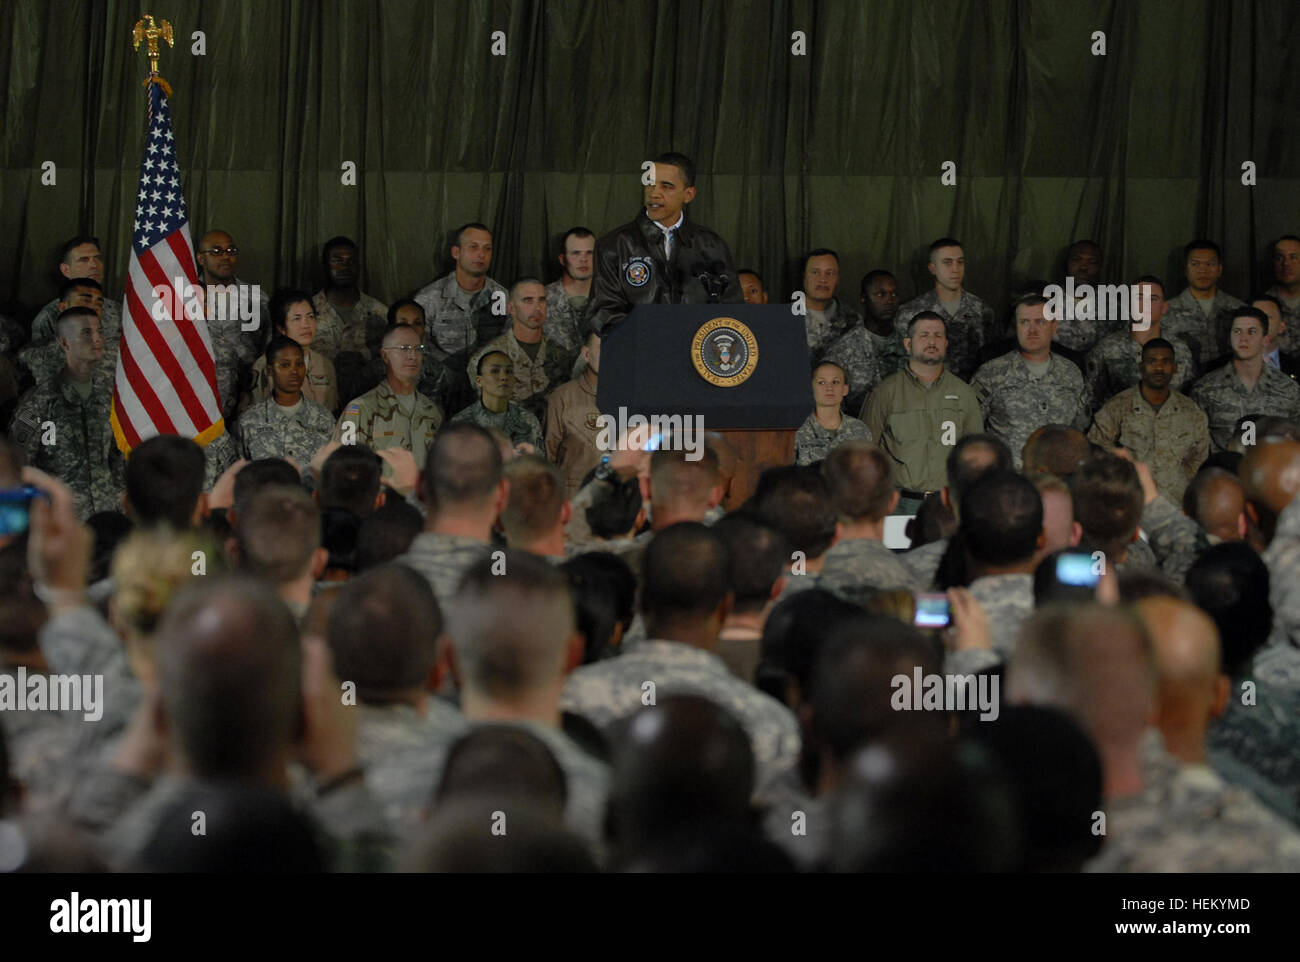 BAGRAM AIRFIELD, Afghanistan – The President of the United States Barack Obama gives a speech to servicemembers and civilians stationed at Bagram Airfield during surprise visit to Afghanistan, March 28. Prior to speaking to the troops, Obama flew to Kabul to meet with Afghanistan’s president Hamid Karzai. (Photo by U.S. Army Spc. Jay Venturini, 304th Public Affairs Detachment) President Barack Obama Visits Bagram Airfield 264188 Stock Photo